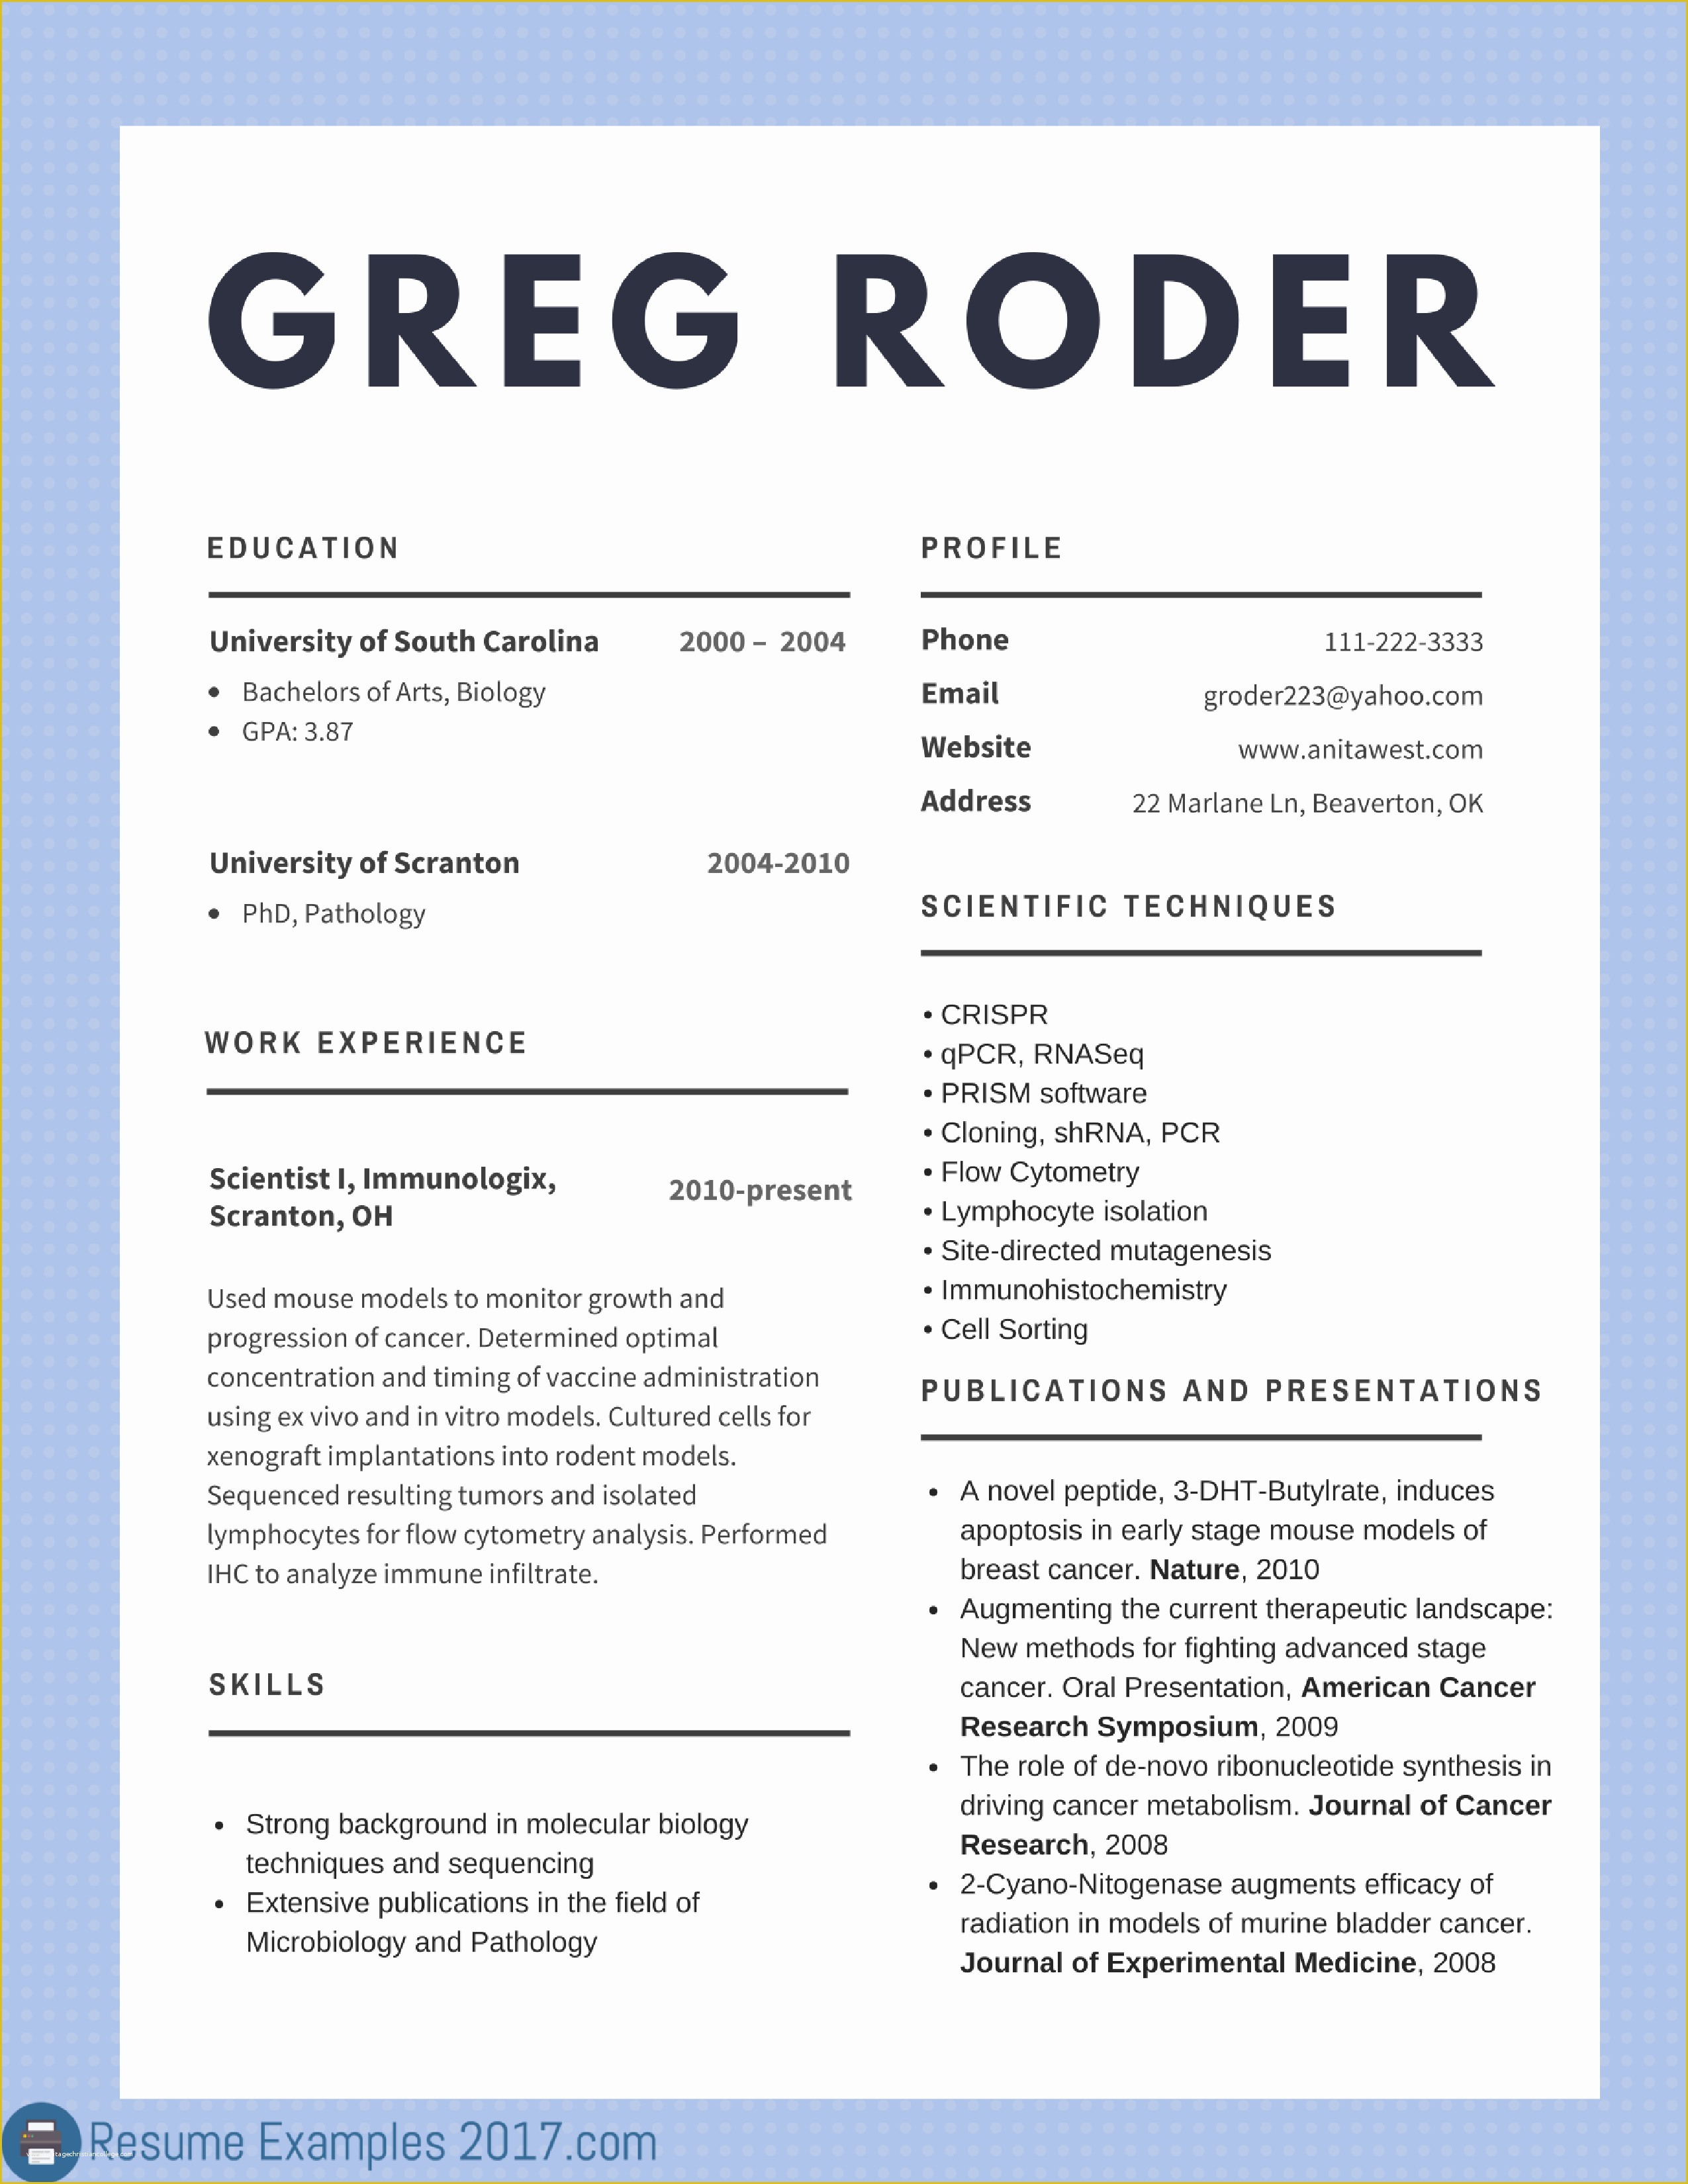 Download Free Resume Templates 2017 Of Best Cv Examples 2018 to Try